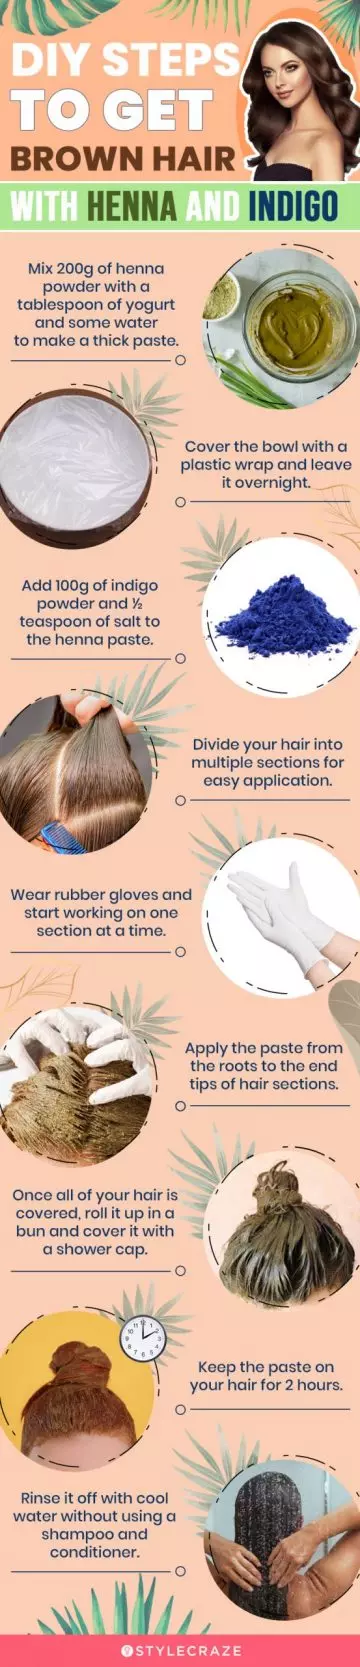 diy steps to get brown hair with henna and indigo (infographic)